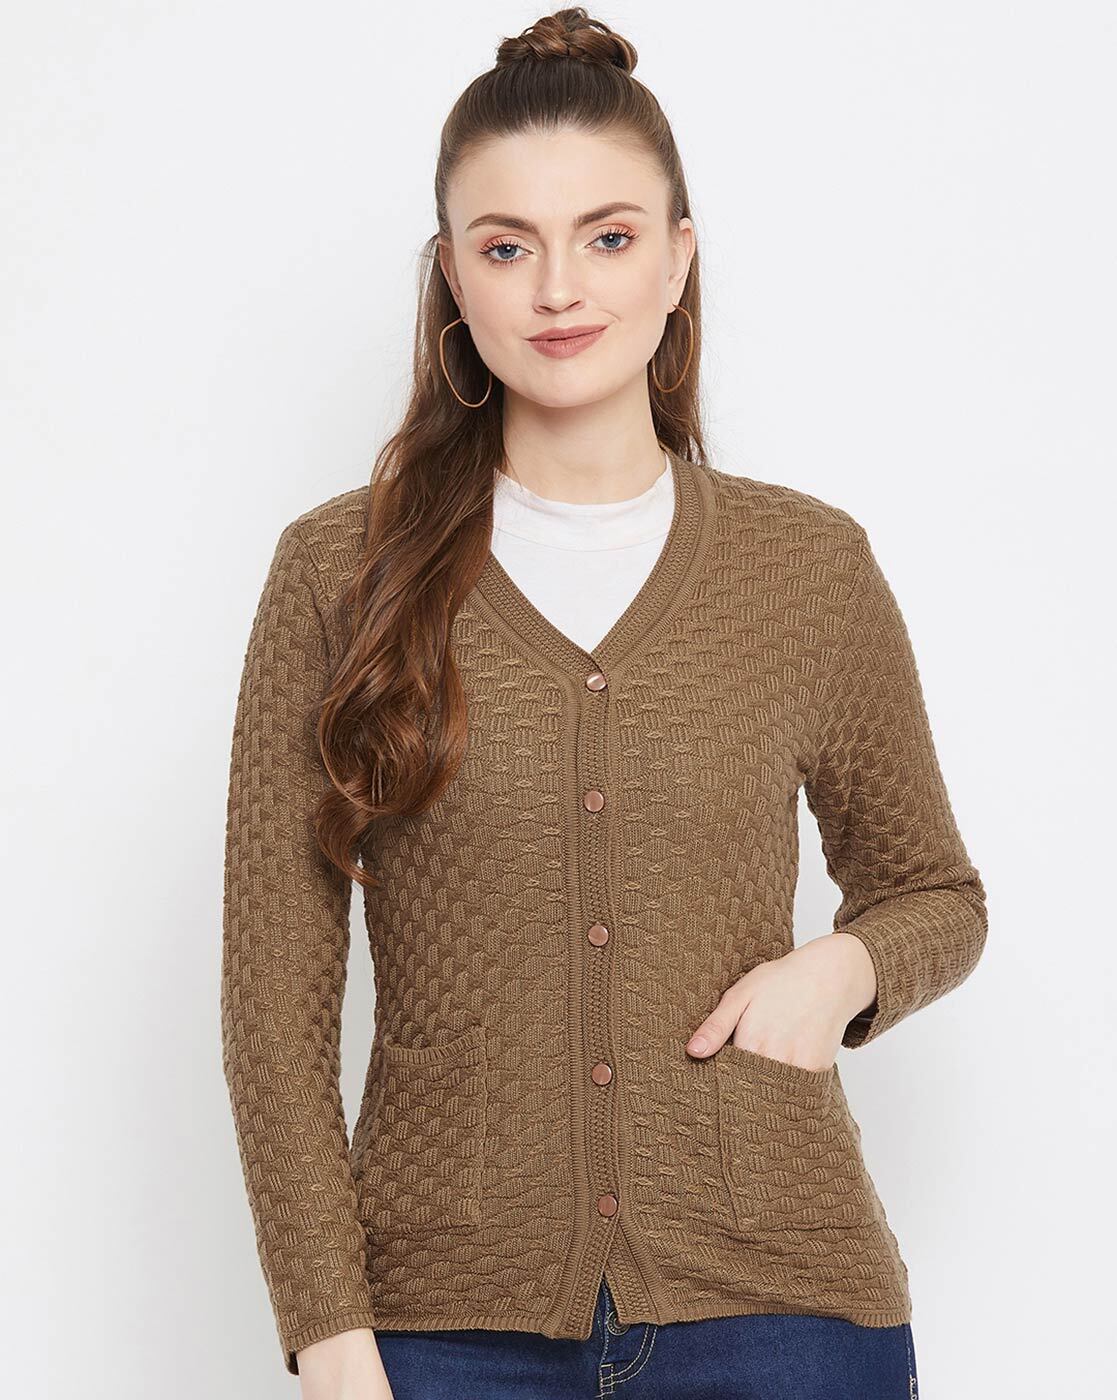 Textured Cardigan with Insert Pockets